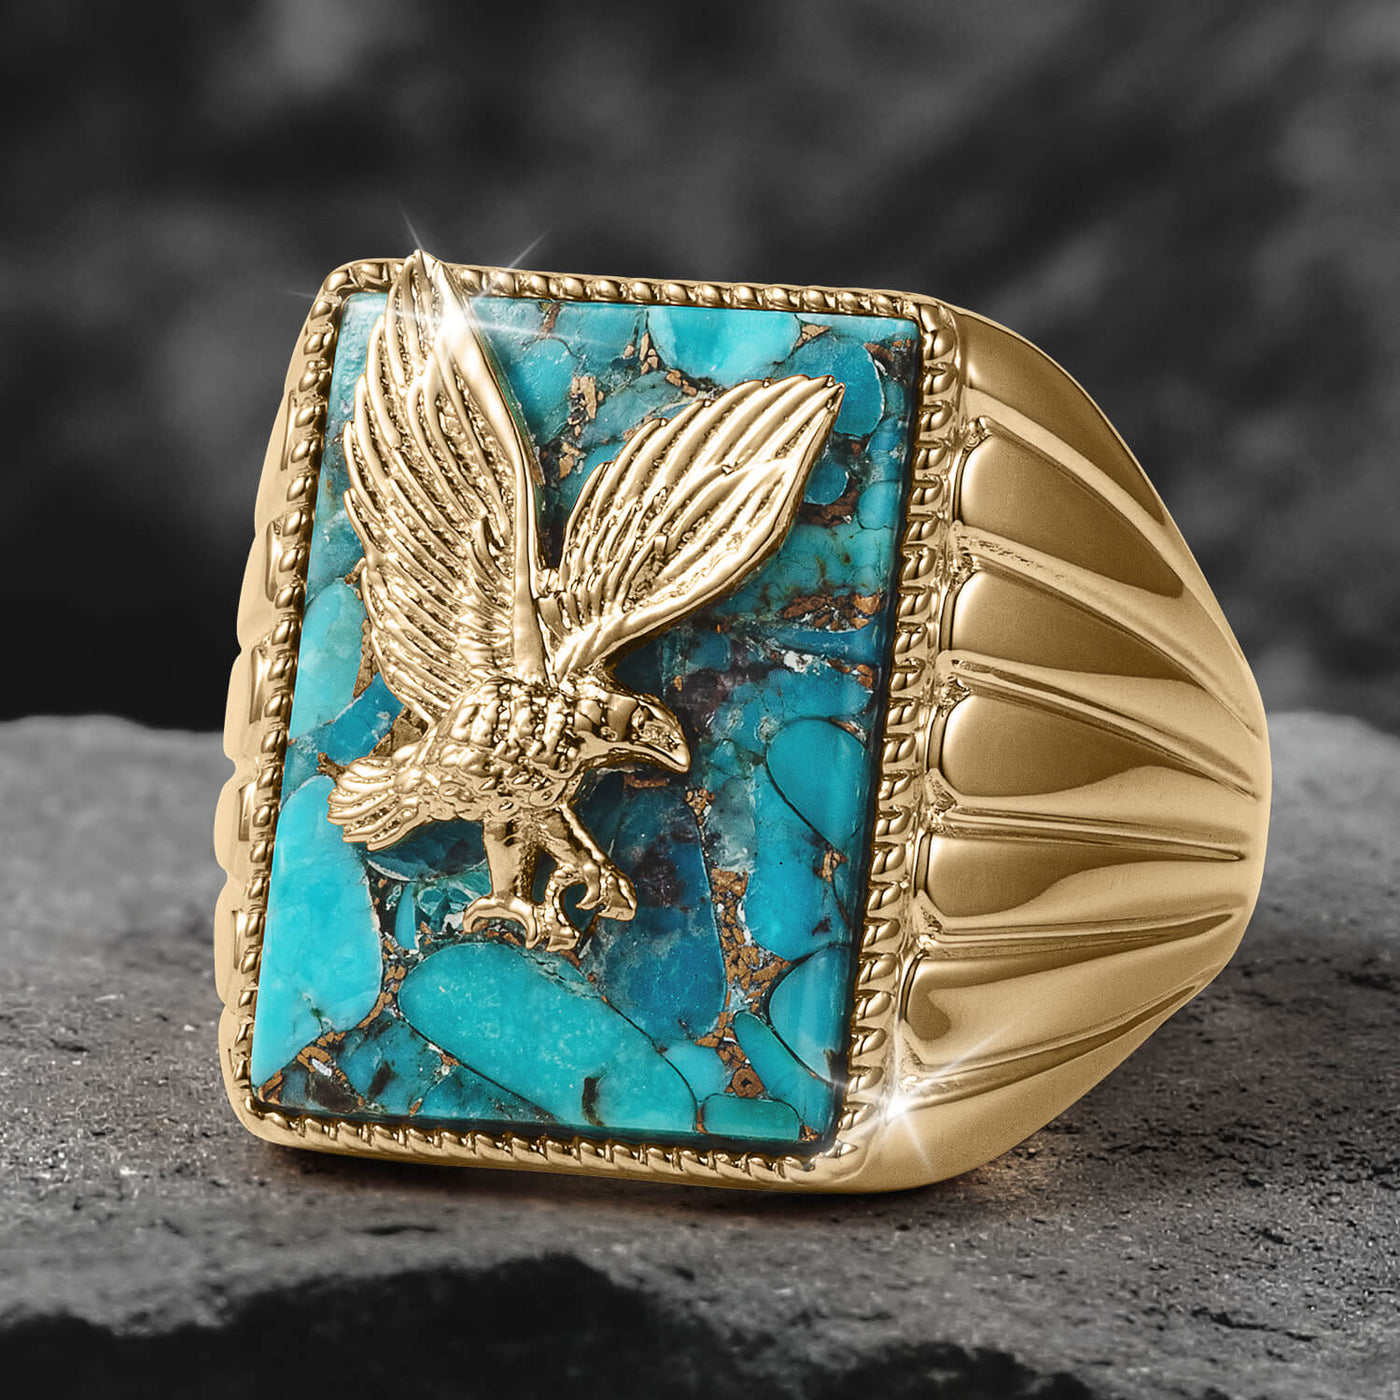 Wrathful Eagle 925 Sterling Silver Mens Ring » Anitolia